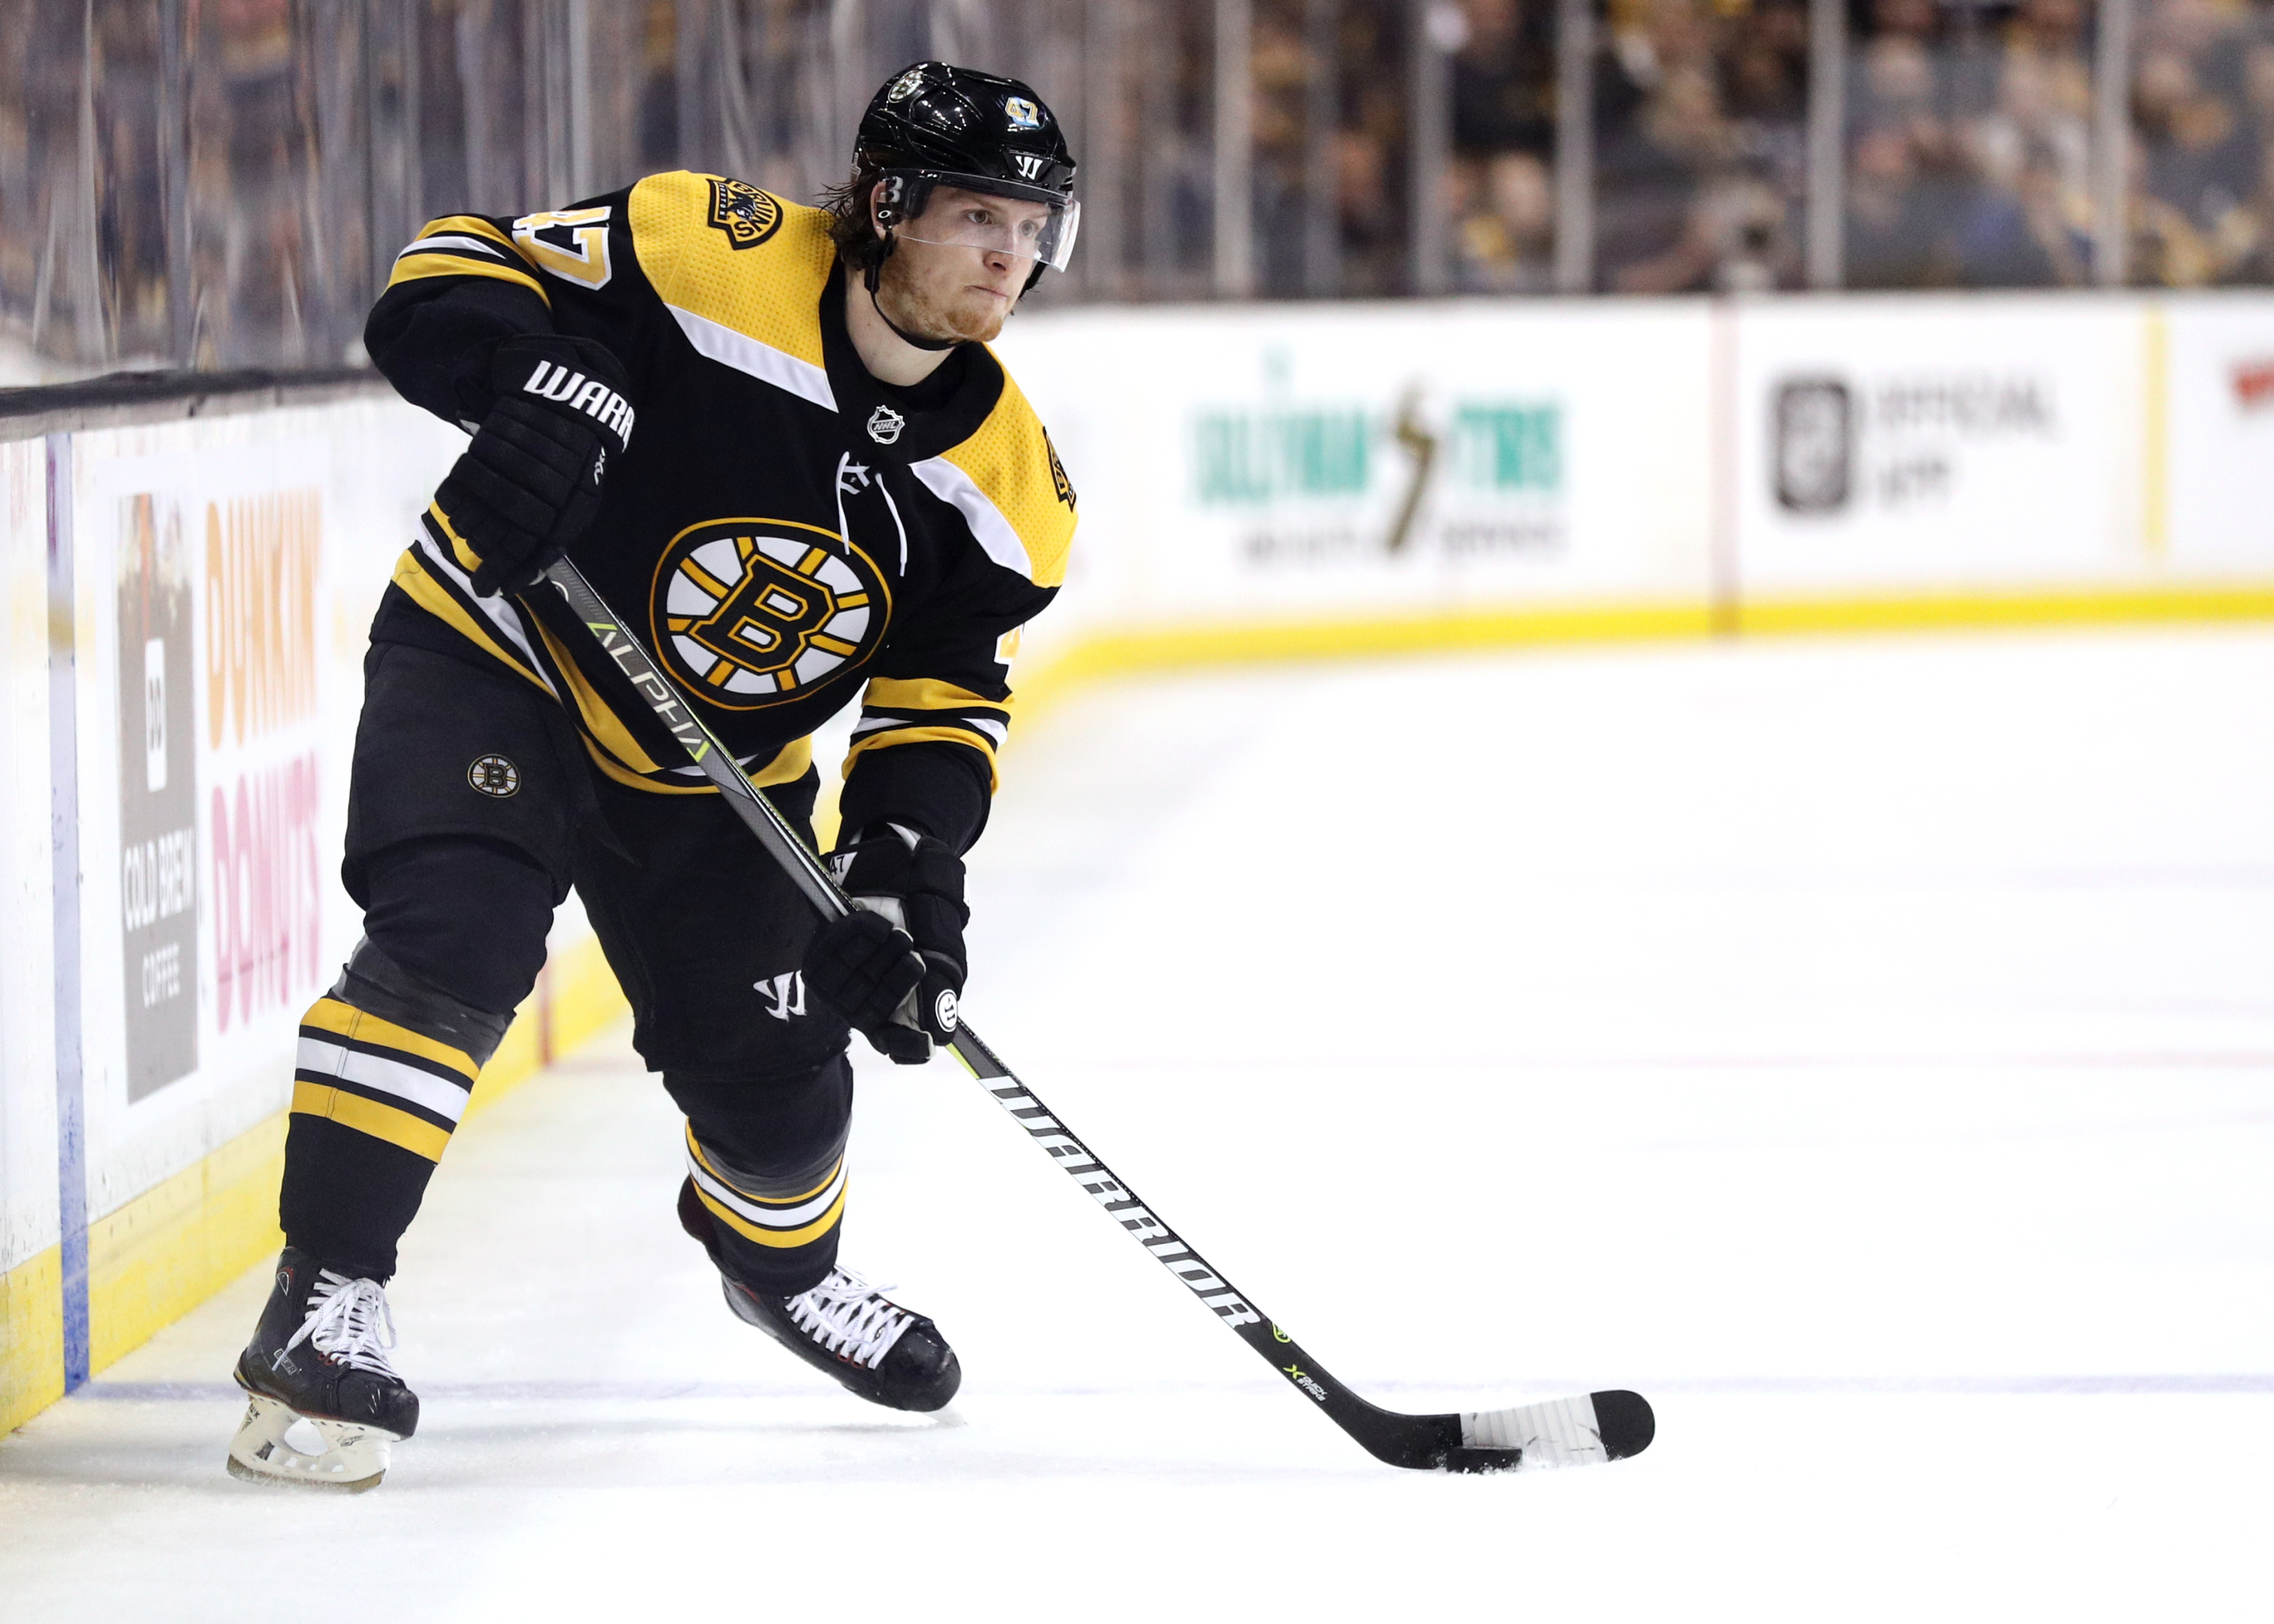 Don't make that guy mad.' Torey Krug's hit exemplified the Bruins' night -  The Boston Globe